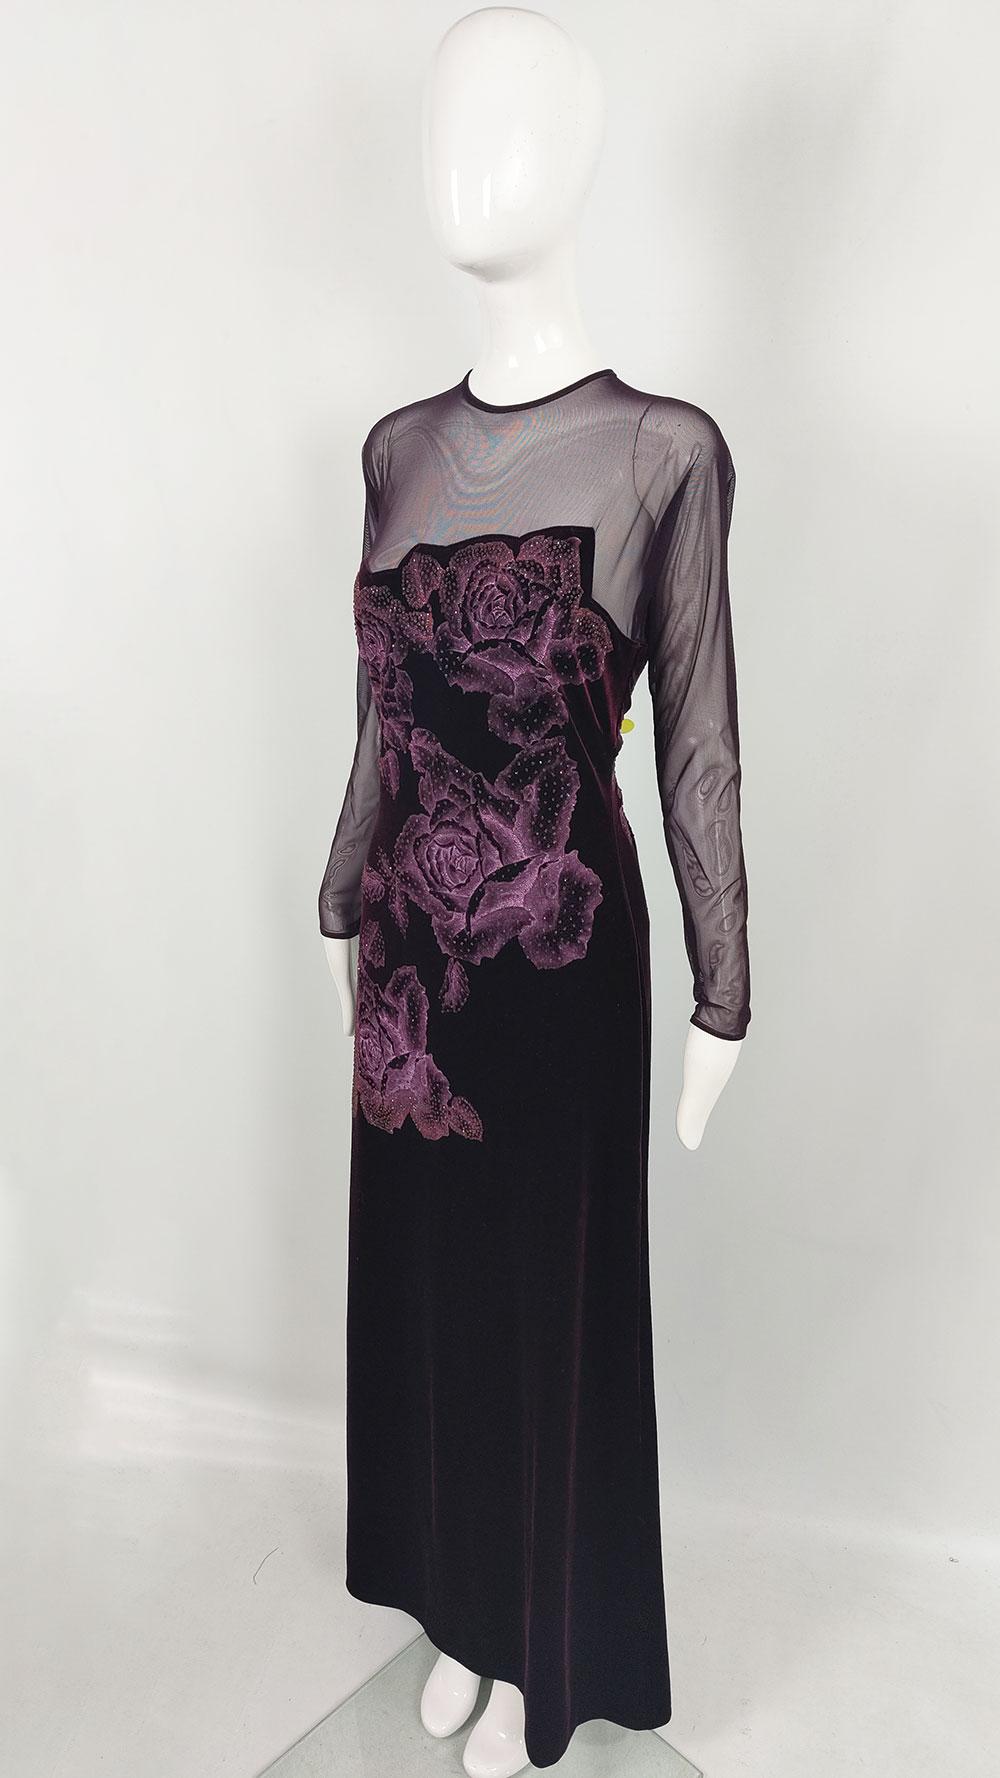 Tadashi Shoji Vintage Aubergine Mesh & Velvet Sexy Sheer Evening Gown Dress In Good Condition For Sale In Doncaster, South Yorkshire